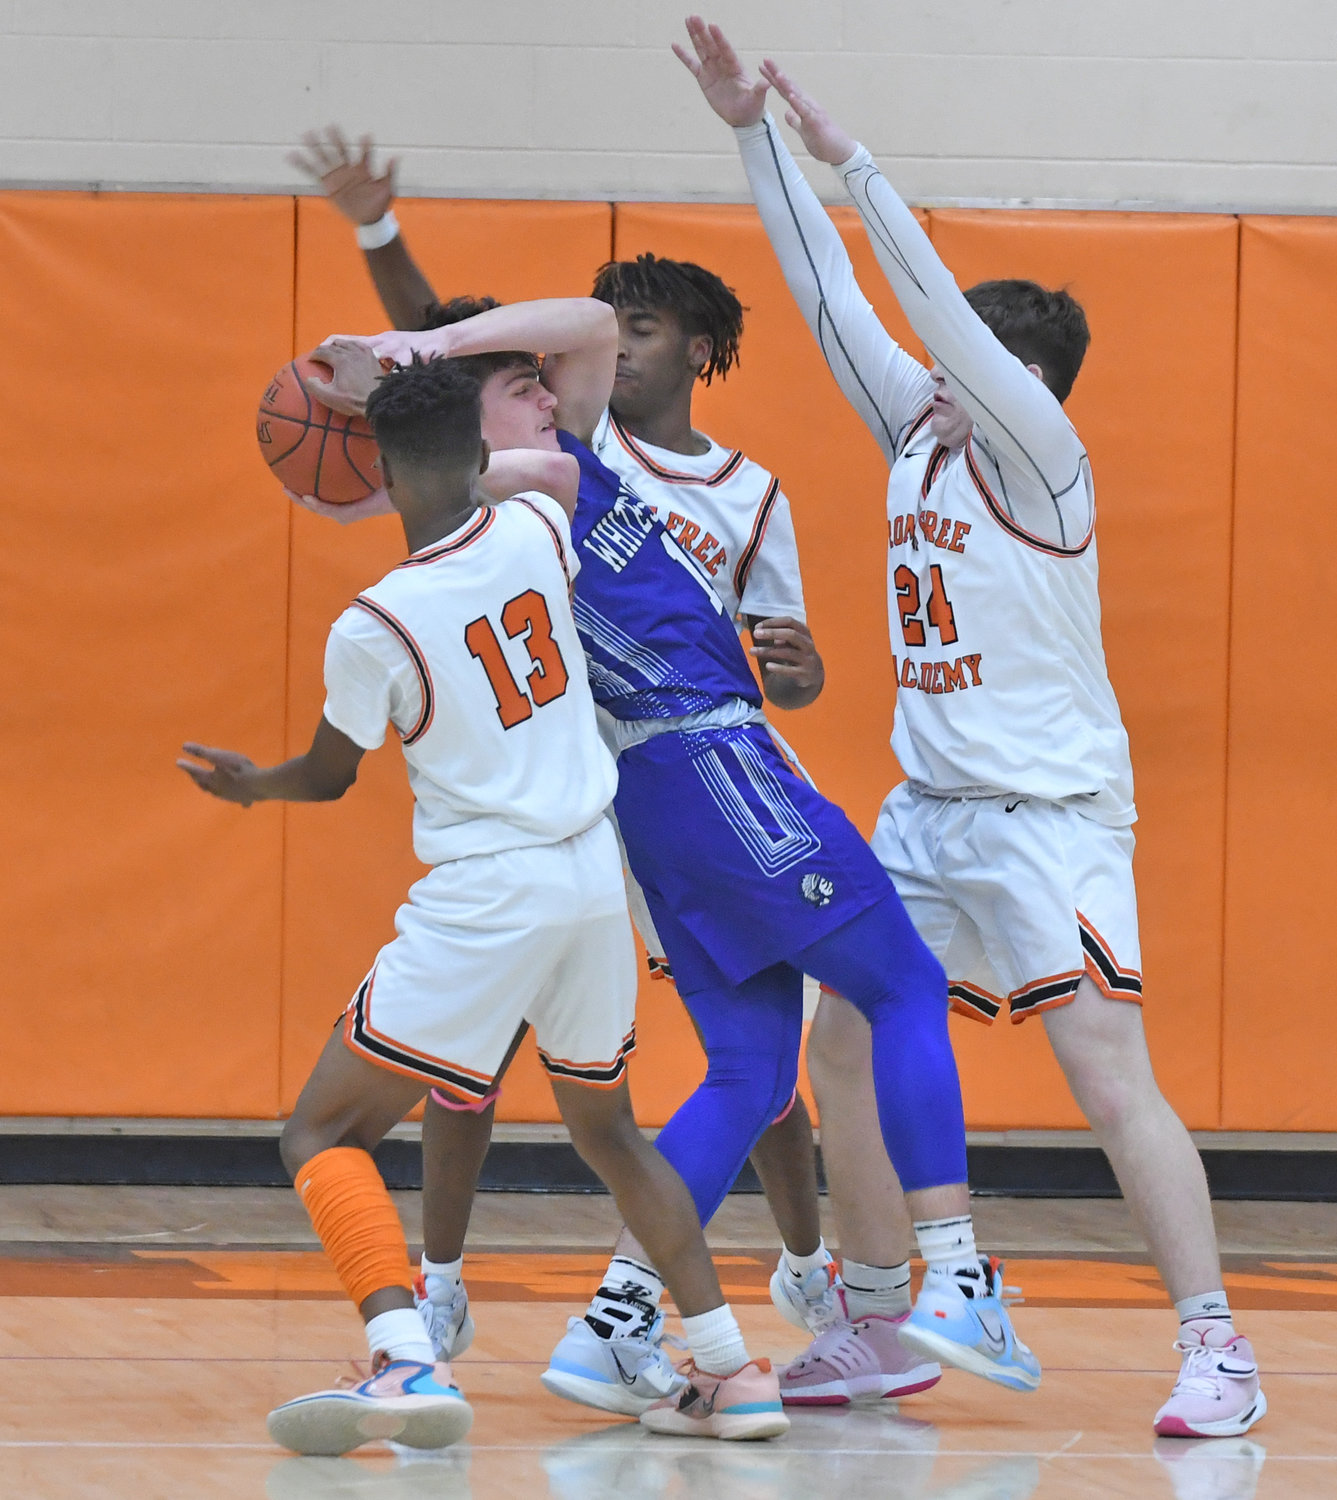 Rome Free Academy defenders swarm Whitesboro's Anthony Dorozynski Tuesday night at home. From left are Deandre Neal, Isaiah DeJean and Luke Hammon. Dorozynski led the Warriors with 12 points but the team lost 52-37.